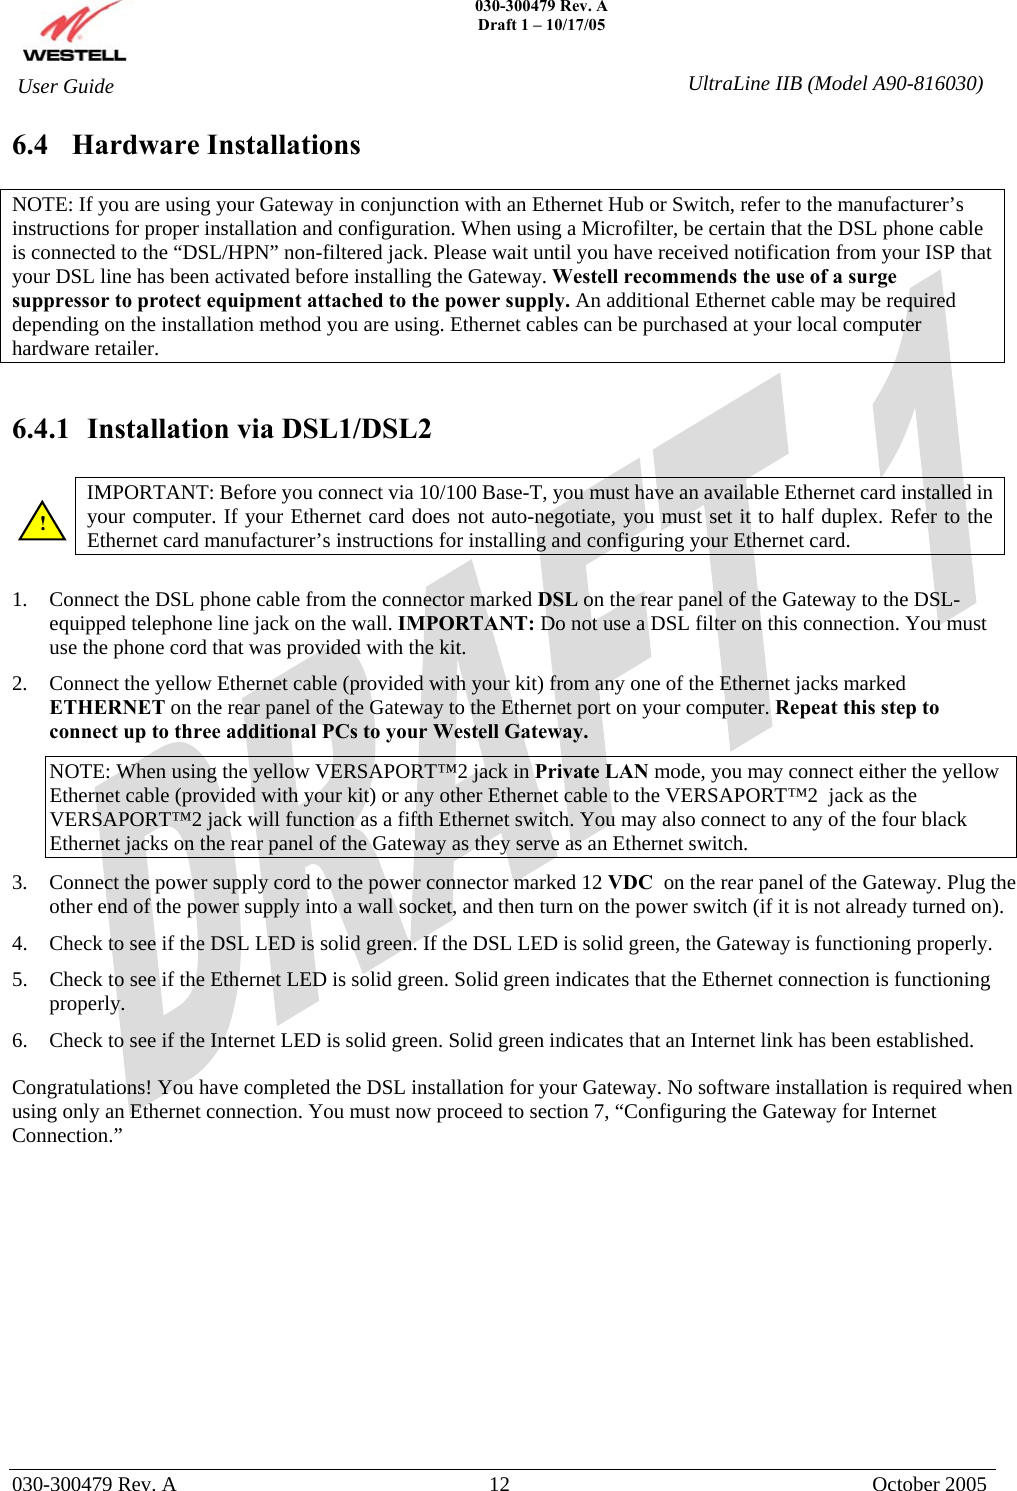    030-300479 Rev. A Draft 1 – 10/17/05   030-300479 Rev. A  12  October 2005  User Guide  UltraLine IIB (Model A90-816030)6.4 Hardware Installations  NOTE: If you are using your Gateway in conjunction with an Ethernet Hub or Switch, refer to the manufacturer’s instructions for proper installation and configuration. When using a Microfilter, be certain that the DSL phone cable is connected to the “DSL/HPN” non-filtered jack. Please wait until you have received notification from your ISP that your DSL line has been activated before installing the Gateway. Westell recommends the use of a surge suppressor to protect equipment attached to the power supply. An additional Ethernet cable may be required depending on the installation method you are using. Ethernet cables can be purchased at your local computer hardware retailer.   6.4.1  Installation via DSL1/DSL2  IMPORTANT: Before you connect via 10/100 Base-T, you must have an available Ethernet card installed in your computer. If your Ethernet card does not auto-negotiate, you must set it to half duplex. Refer to the Ethernet card manufacturer’s instructions for installing and configuring your Ethernet card.   1.  Connect the DSL phone cable from the connector marked DSL on the rear panel of the Gateway to the DSL-equipped telephone line jack on the wall. IMPORTANT: Do not use a DSL filter on this connection. You must use the phone cord that was provided with the kit. 2.  Connect the yellow Ethernet cable (provided with your kit) from any one of the Ethernet jacks marked ETHERNET on the rear panel of the Gateway to the Ethernet port on your computer. Repeat this step to connect up to three additional PCs to your Westell Gateway. NOTE: When using the yellow VERSAPORT™2 jack in Private LAN mode, you may connect either the yellow Ethernet cable (provided with your kit) or any other Ethernet cable to the VERSAPORT™2  jack as the VERSAPORT™2 jack will function as a fifth Ethernet switch. You may also connect to any of the four black Ethernet jacks on the rear panel of the Gateway as they serve as an Ethernet switch. 3.  Connect the power supply cord to the power connector marked 12 VDC  on the rear panel of the Gateway. Plug the other end of the power supply into a wall socket, and then turn on the power switch (if it is not already turned on). 4.  Check to see if the DSL LED is solid green. If the DSL LED is solid green, the Gateway is functioning properly. 5.  Check to see if the Ethernet LED is solid green. Solid green indicates that the Ethernet connection is functioning properly. 6.  Check to see if the Internet LED is solid green. Solid green indicates that an Internet link has been established.  Congratulations! You have completed the DSL installation for your Gateway. No software installation is required when using only an Ethernet connection. You must now proceed to section 7, “Configuring the Gateway for Internet Connection.”              ! 